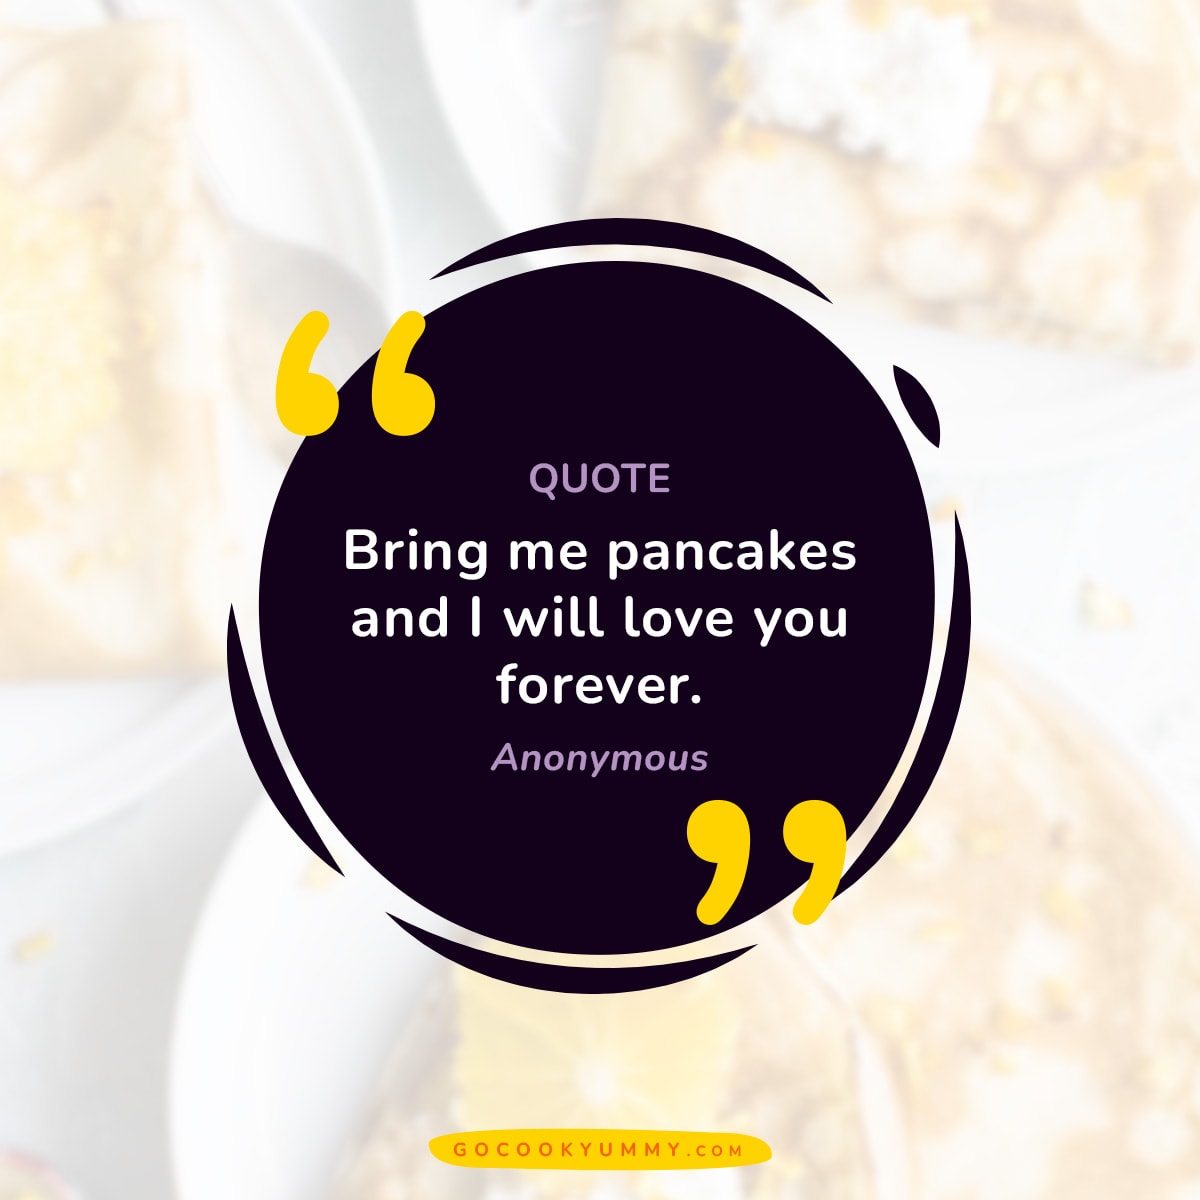 100+ Pancake Quotes and Instagram Captions - Go Cook Yummy